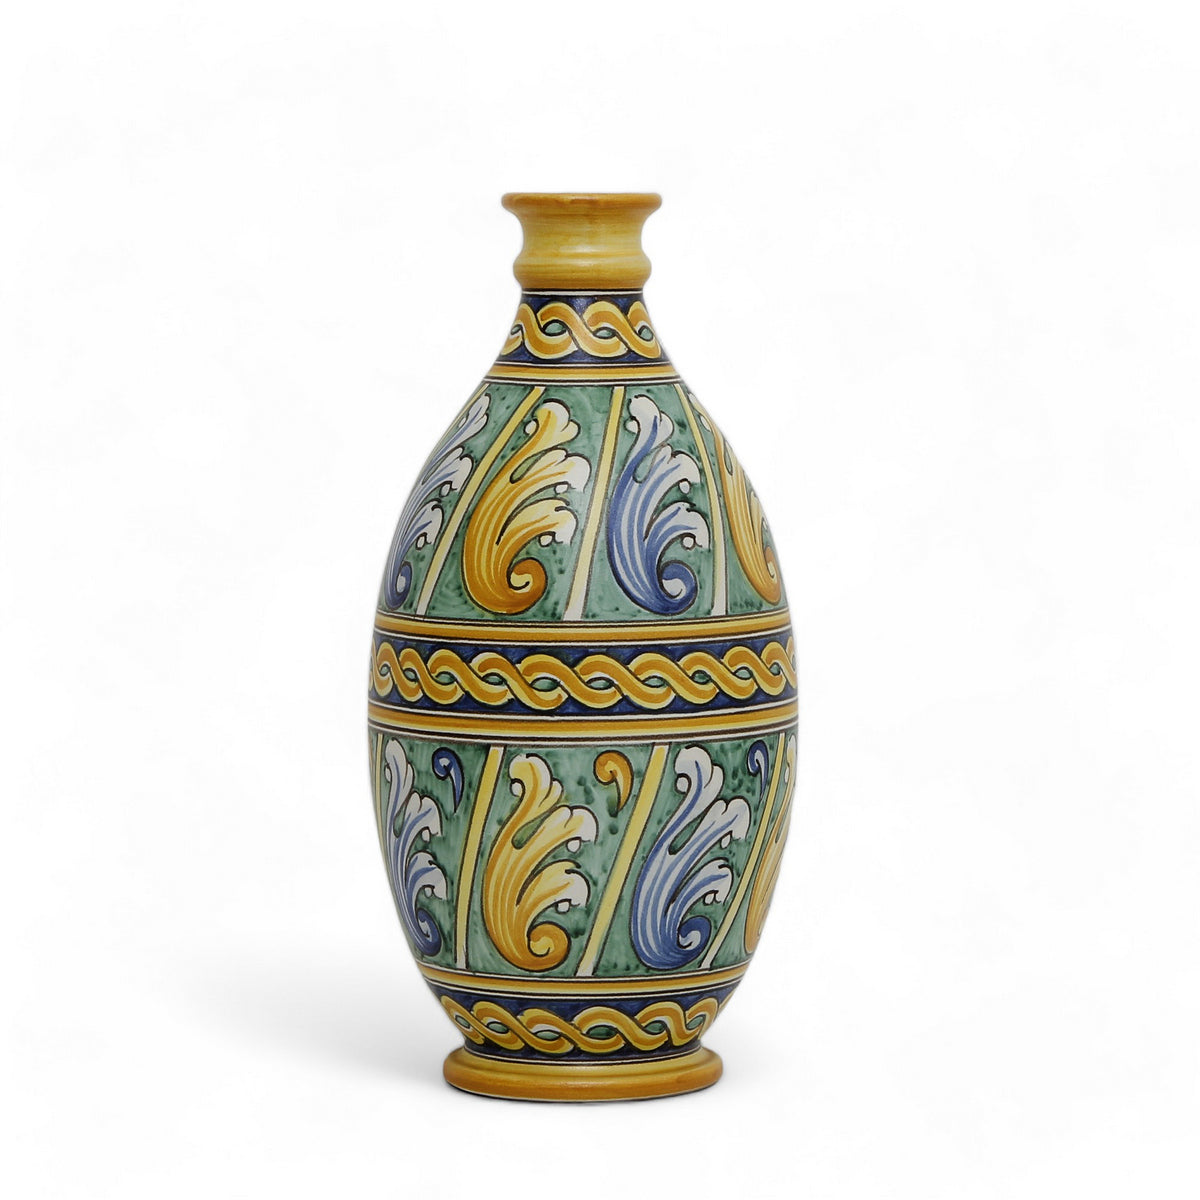 SICILIANA: Bottle Vase "Belly" featuring traditional Green and Gold Sicilian Vario Design